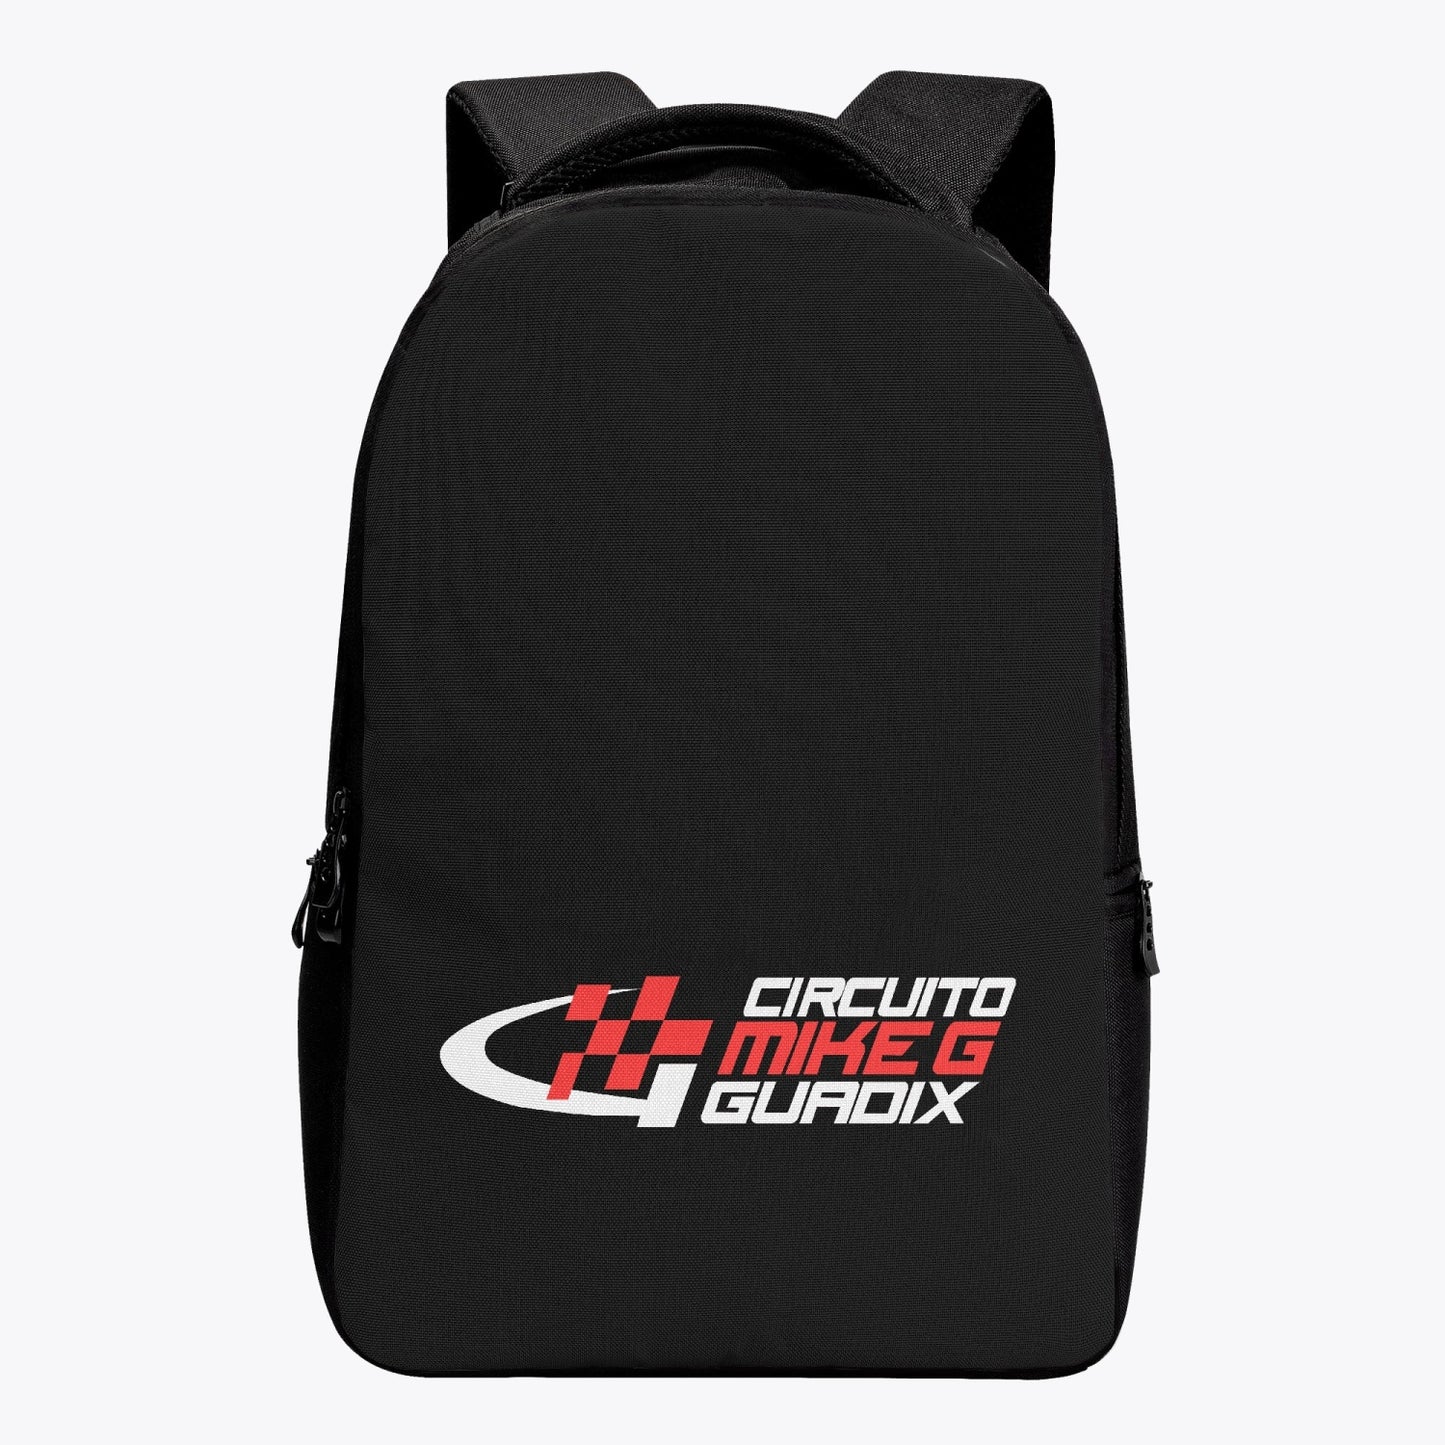 CIRCUITO MIKE G GUADIX Backpack - Large - carbon